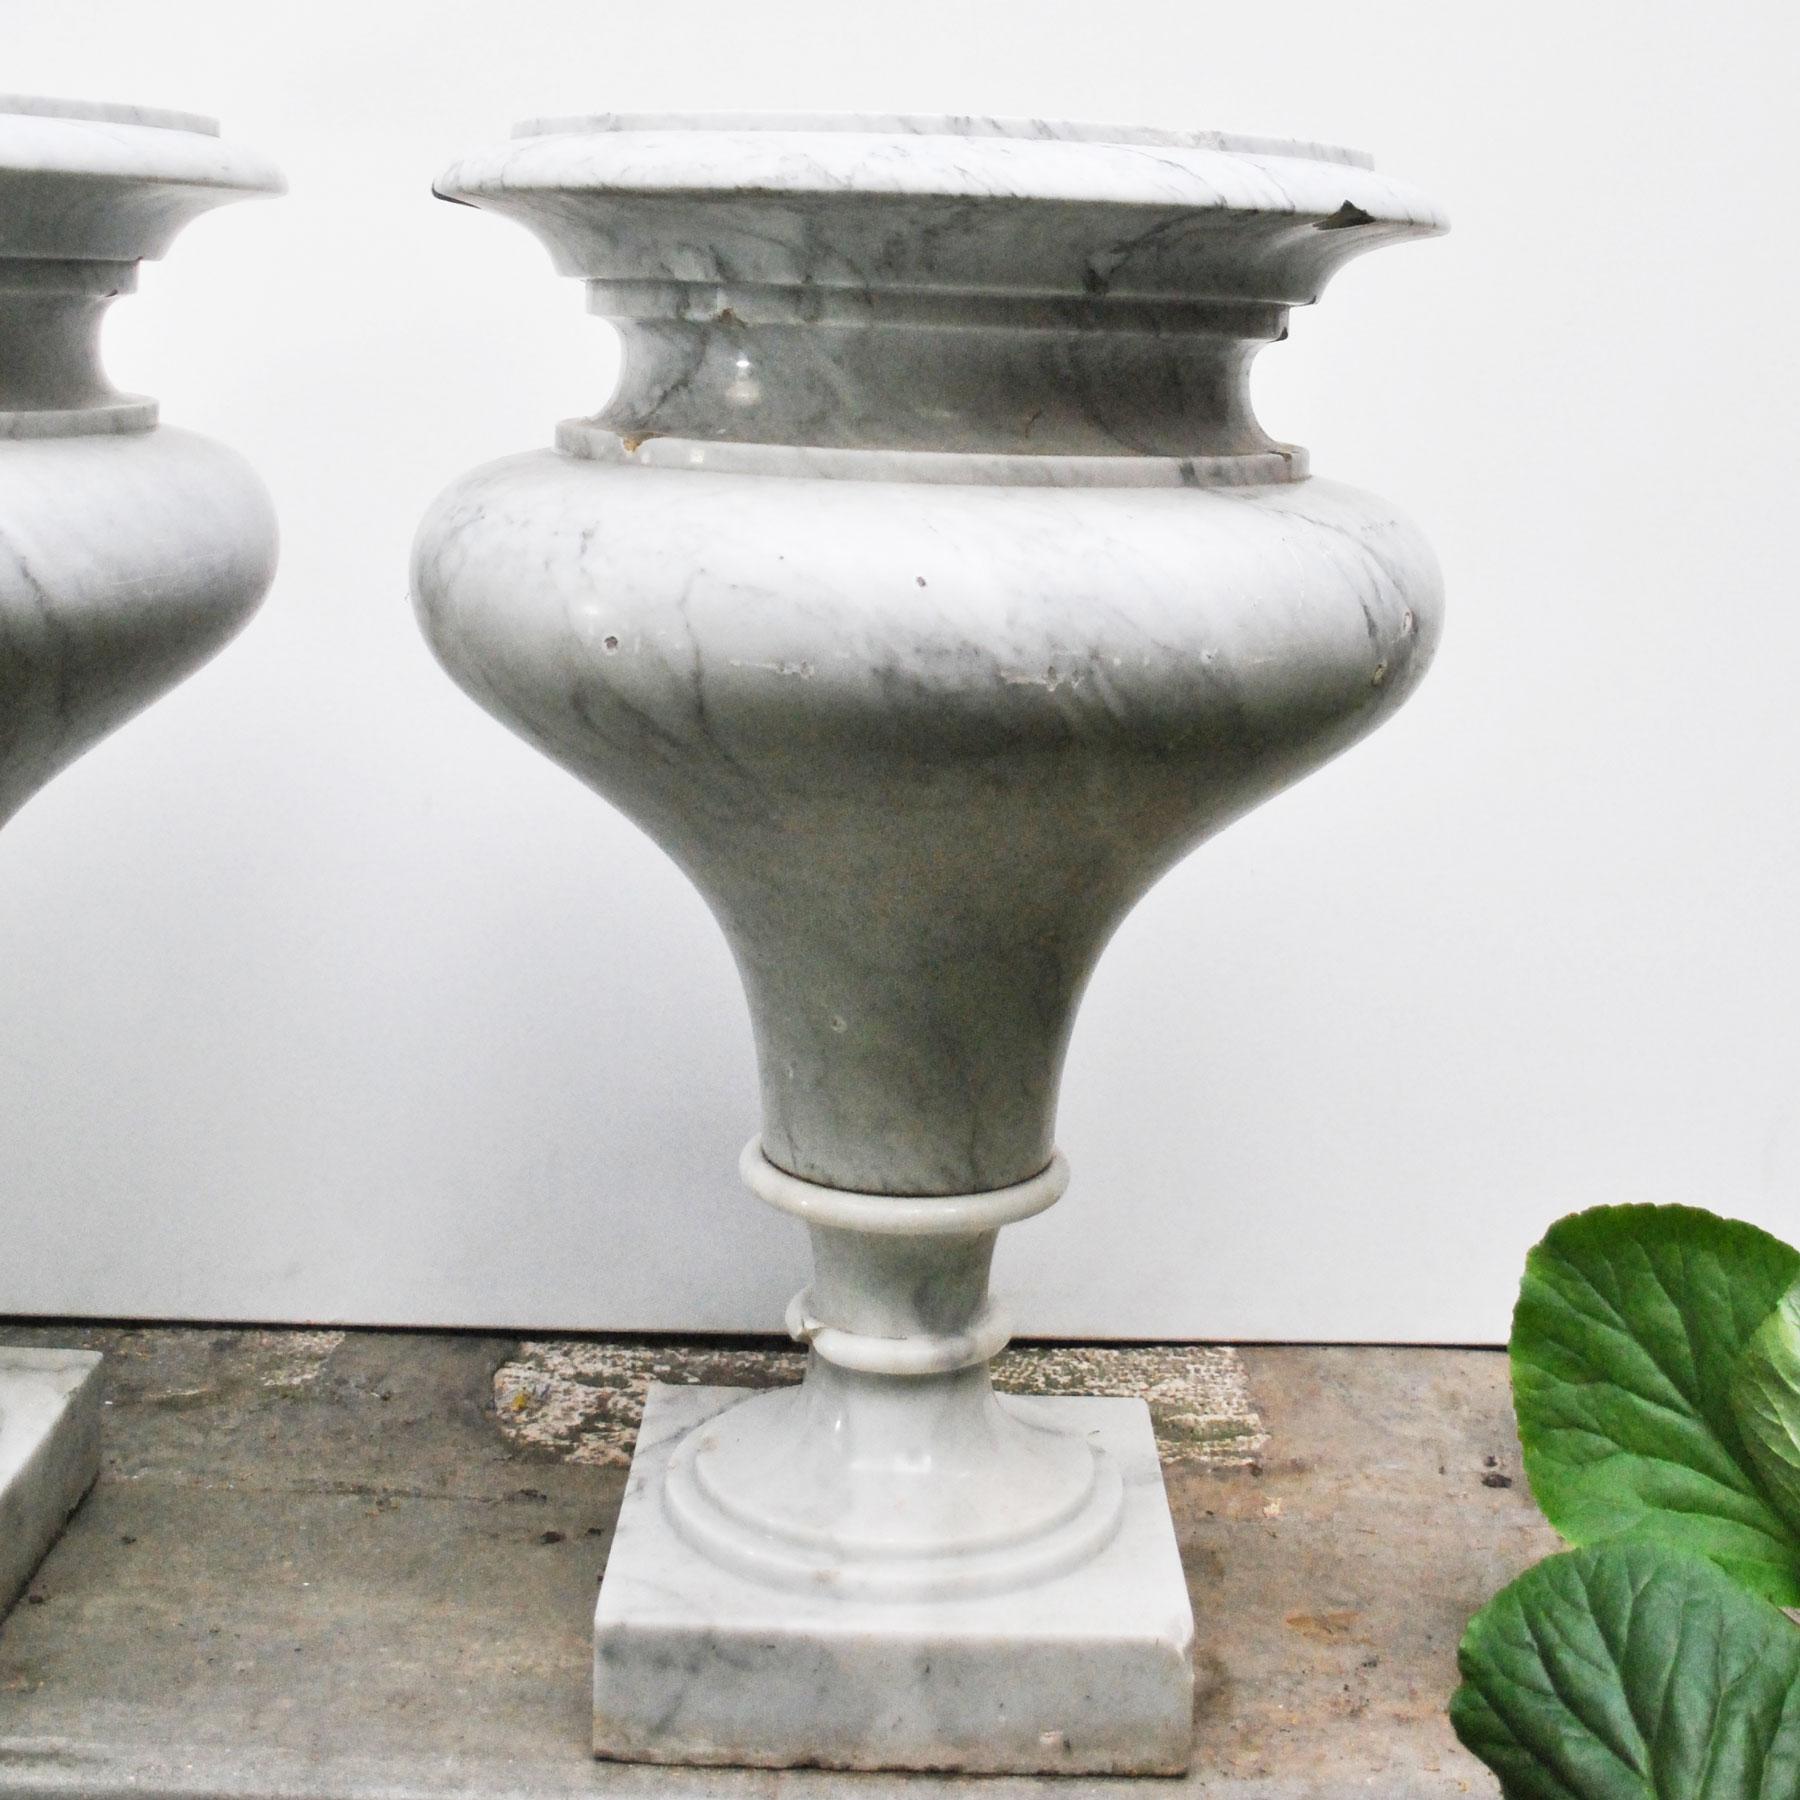 Elegant Pair of Large Carrara Marble Vases, Period Early 20th Century For Sale 5